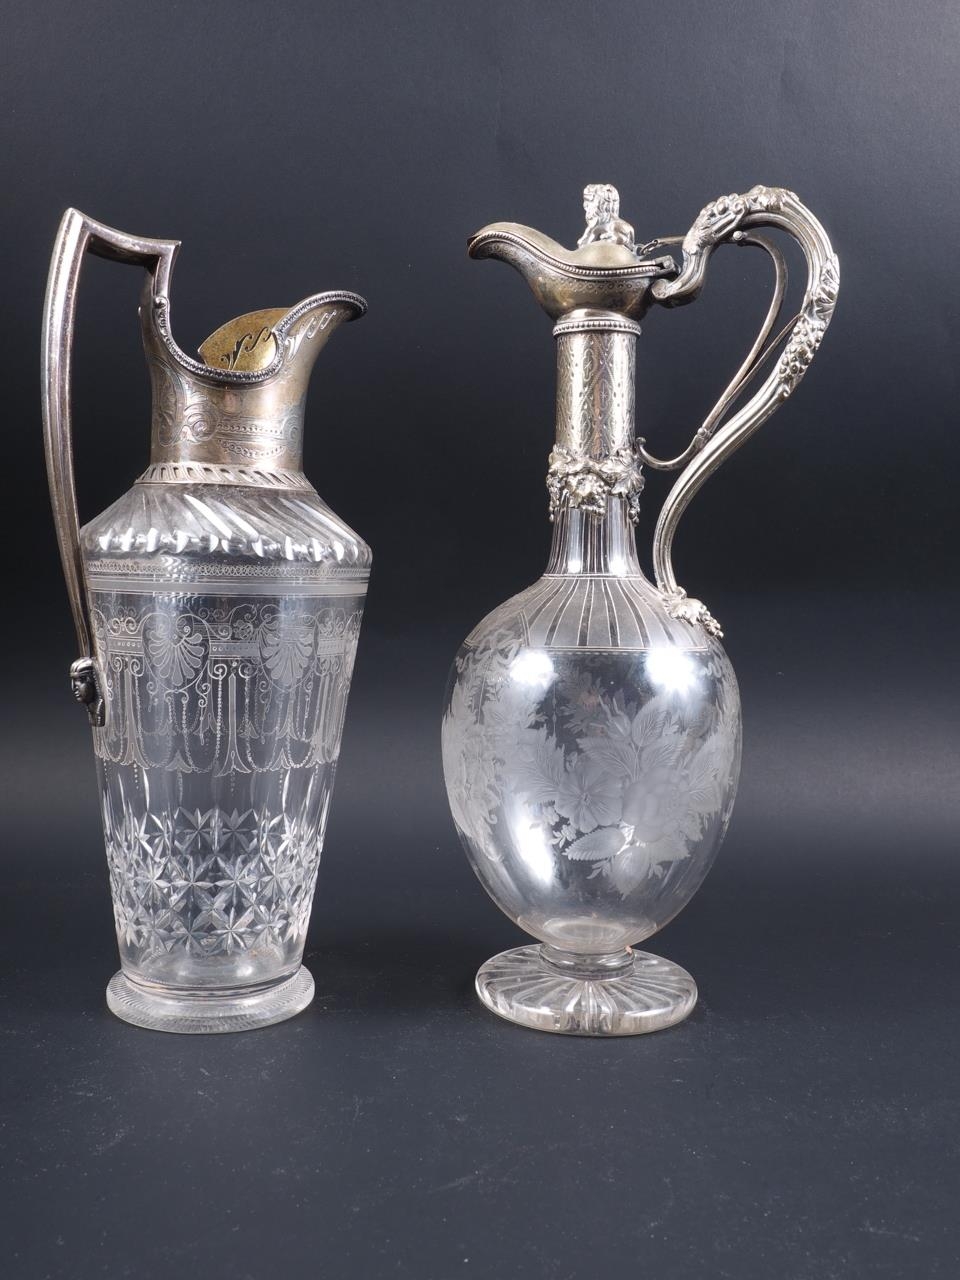 A late 19th century silver mounted claret jug with shell engraved decoration, 11 1/2" high (chip